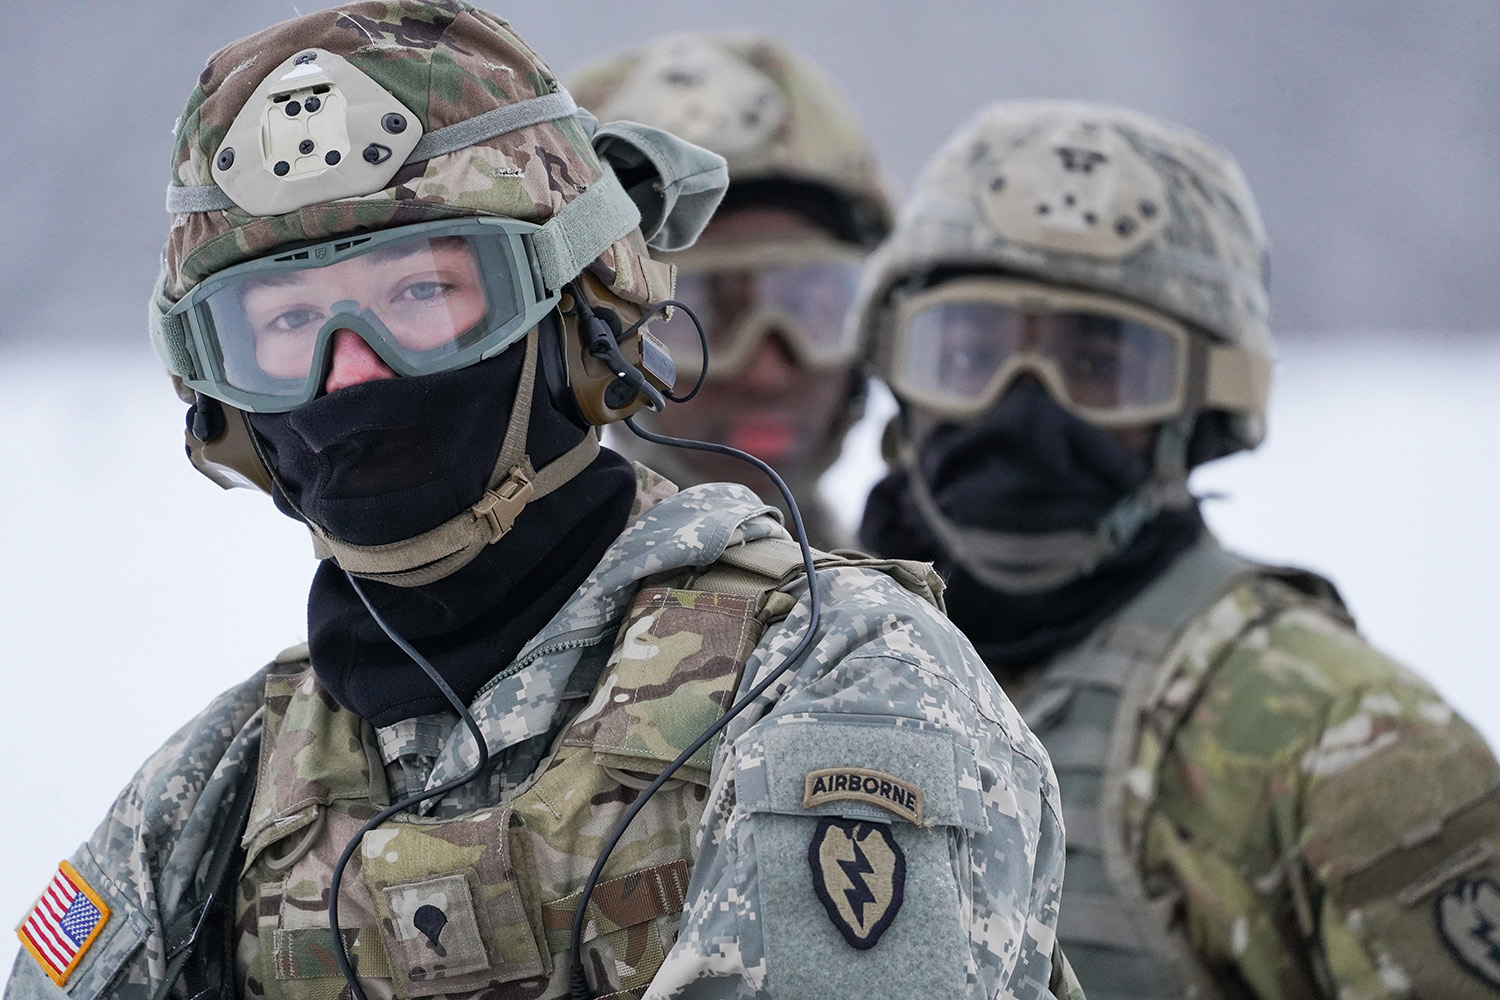 Spc. Eric Stidham assigned to Headquarters and Headquarters Company, 6th Brigade Engineer Battalion (Airborne), 4th Infantry Brigade Combat Team (Airborne), 25th Infantry Division, US Army Alaska, trains with fellow Soldiers and aviators from the Alaska Army National Guard at Neibhur Drop Zone, Nov. 26, 2019